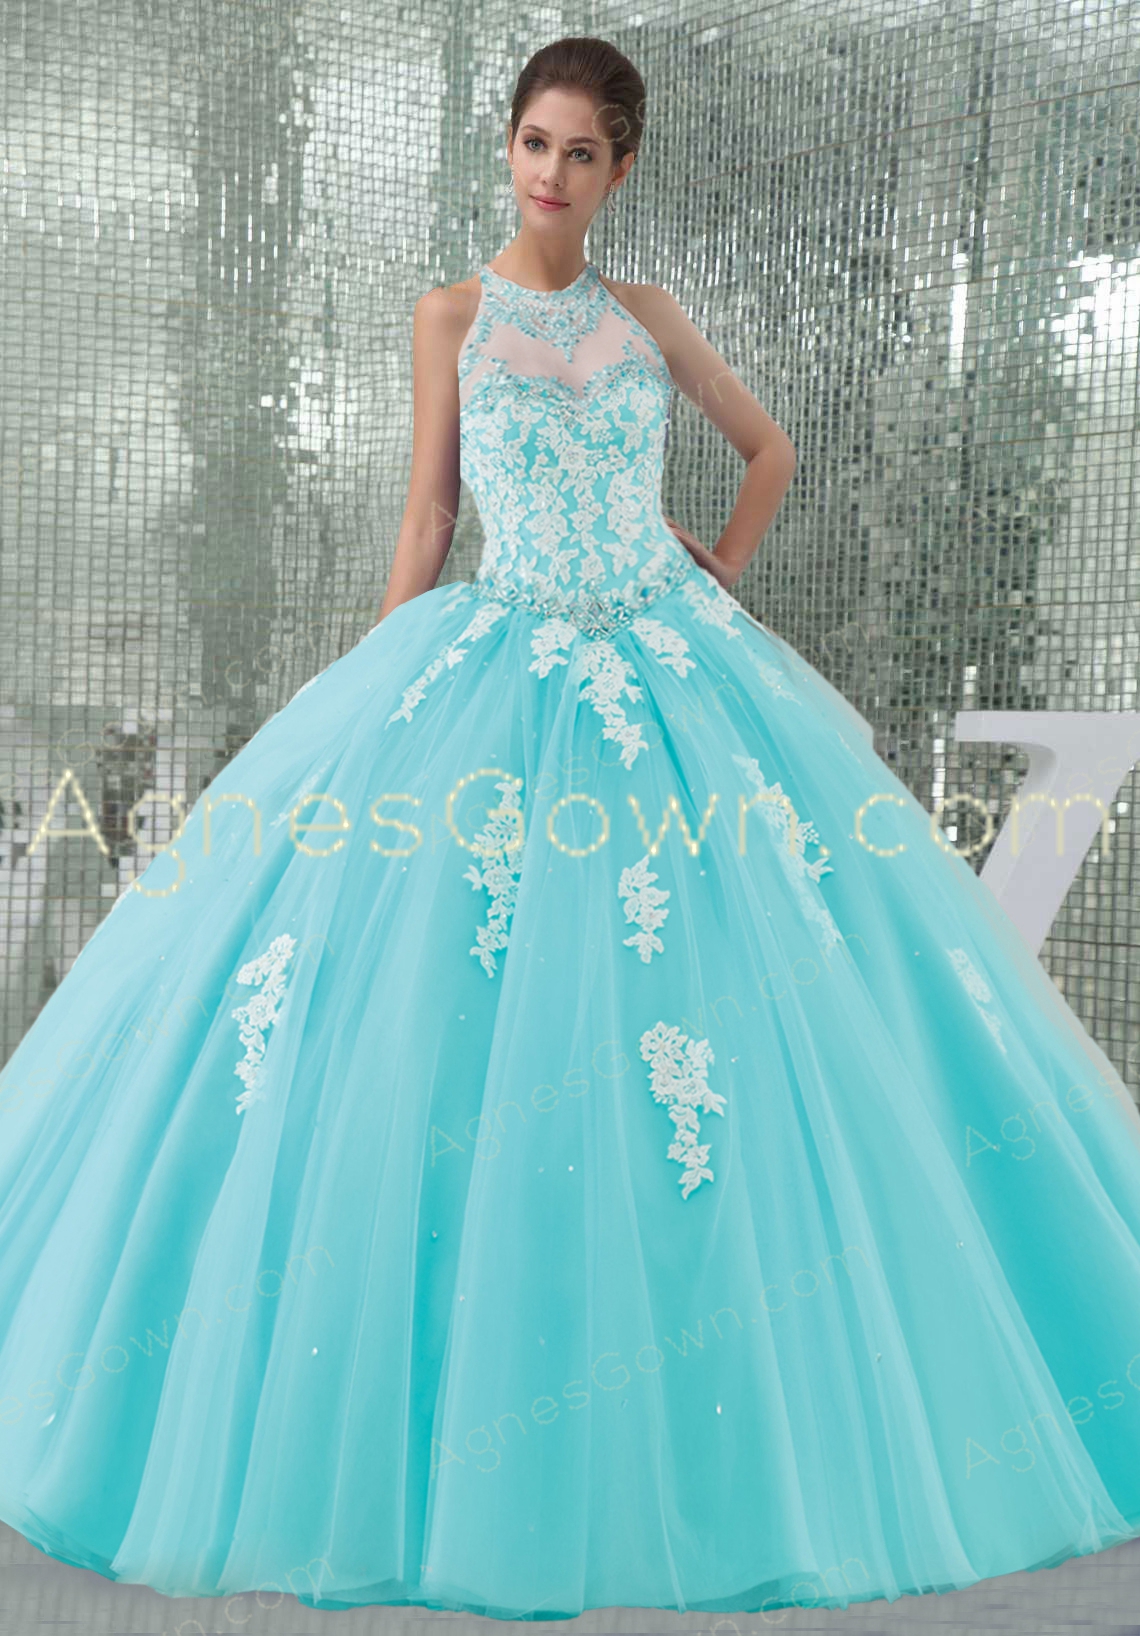 Cute Aqua Halter Ball Gown Quince Dress With Lace Appliques 